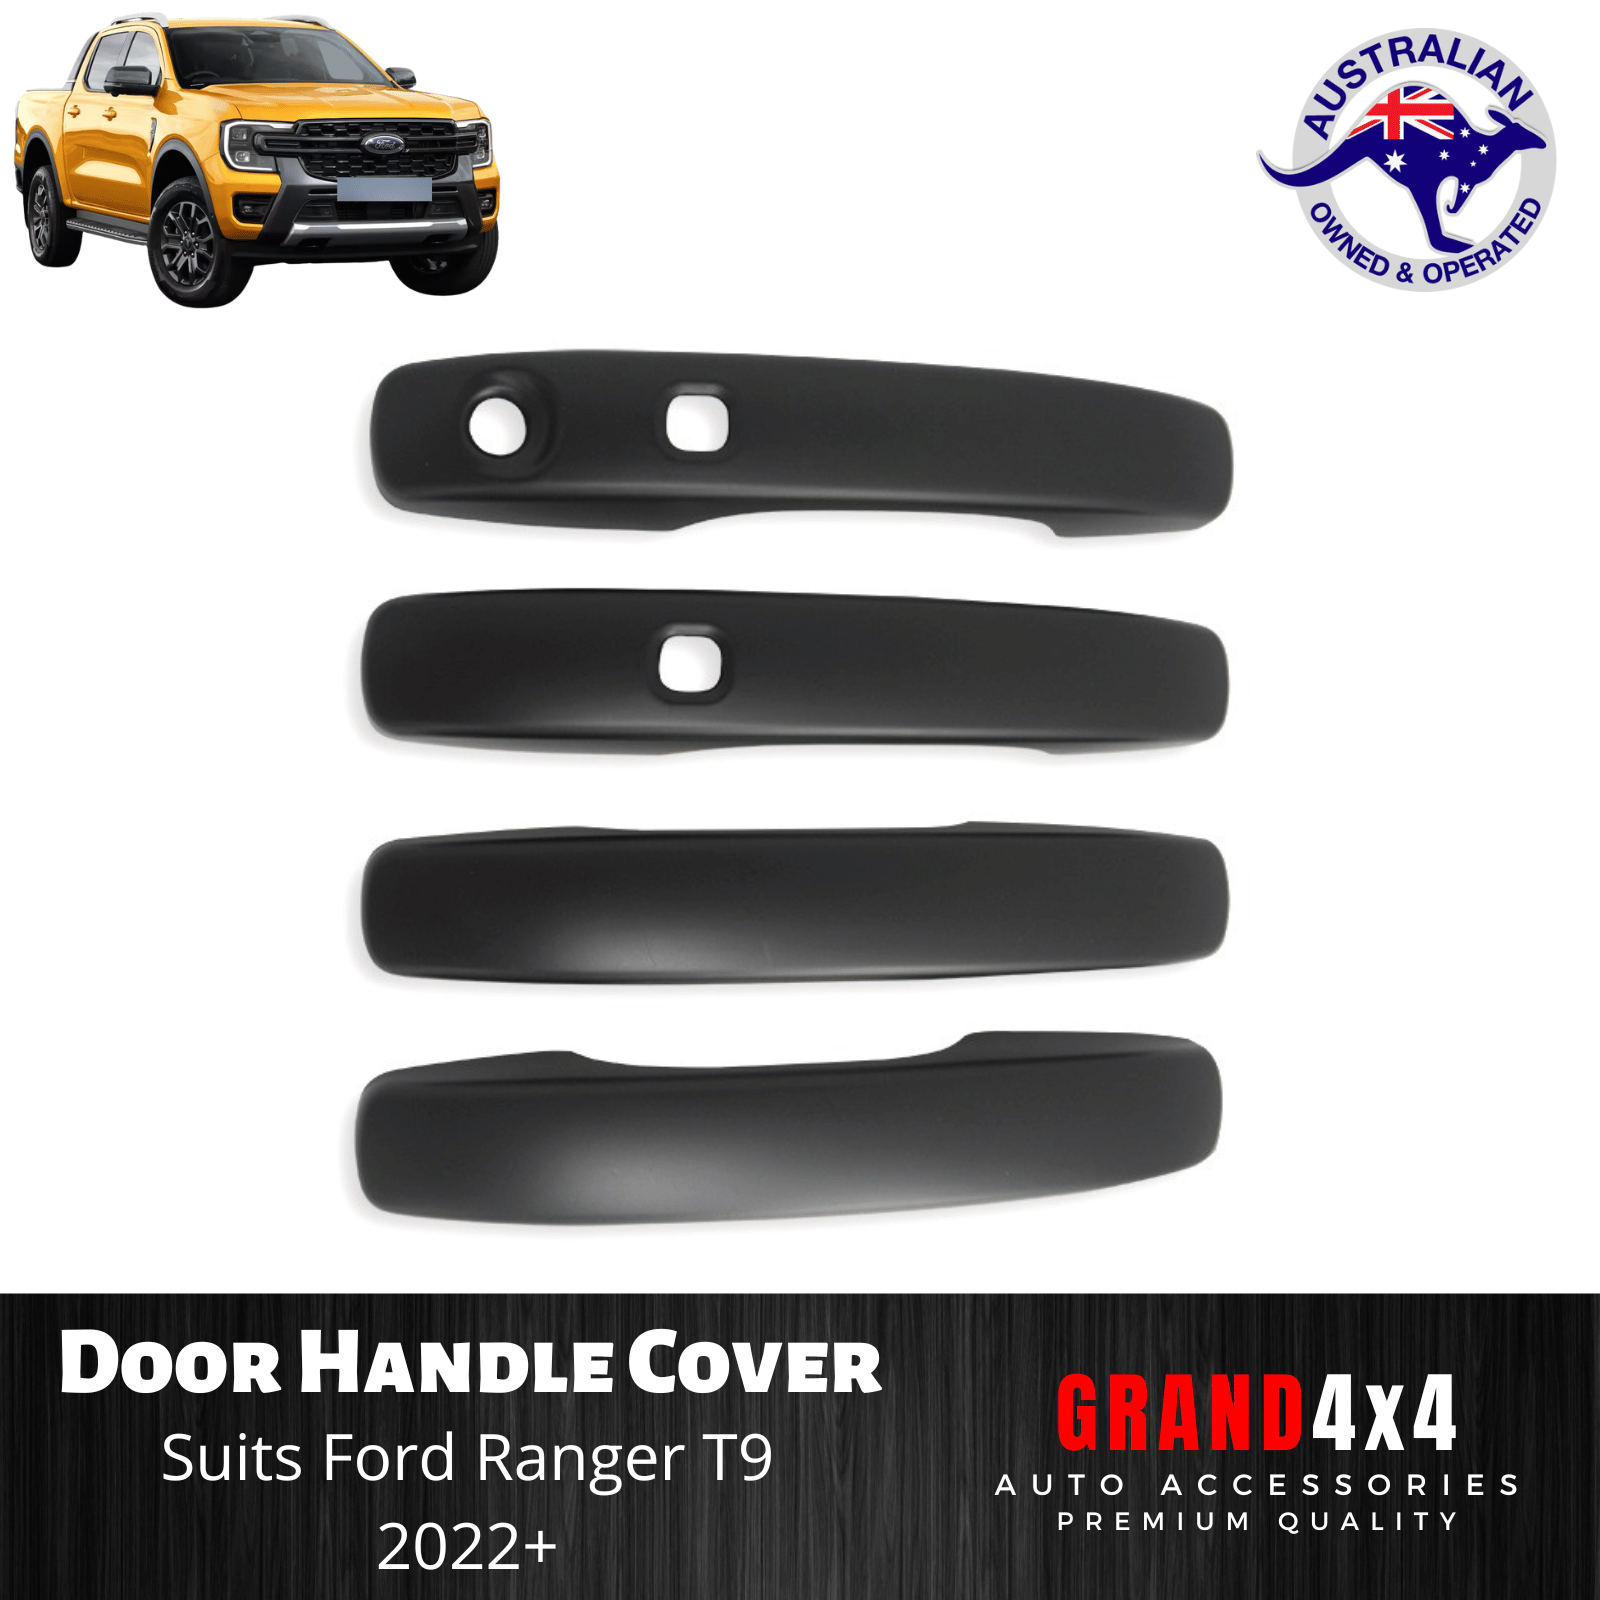 Door Handle Cover Matte Black to suit Ford Ranger T9 2022+ (Keyless Entry)  - GRAND4x4